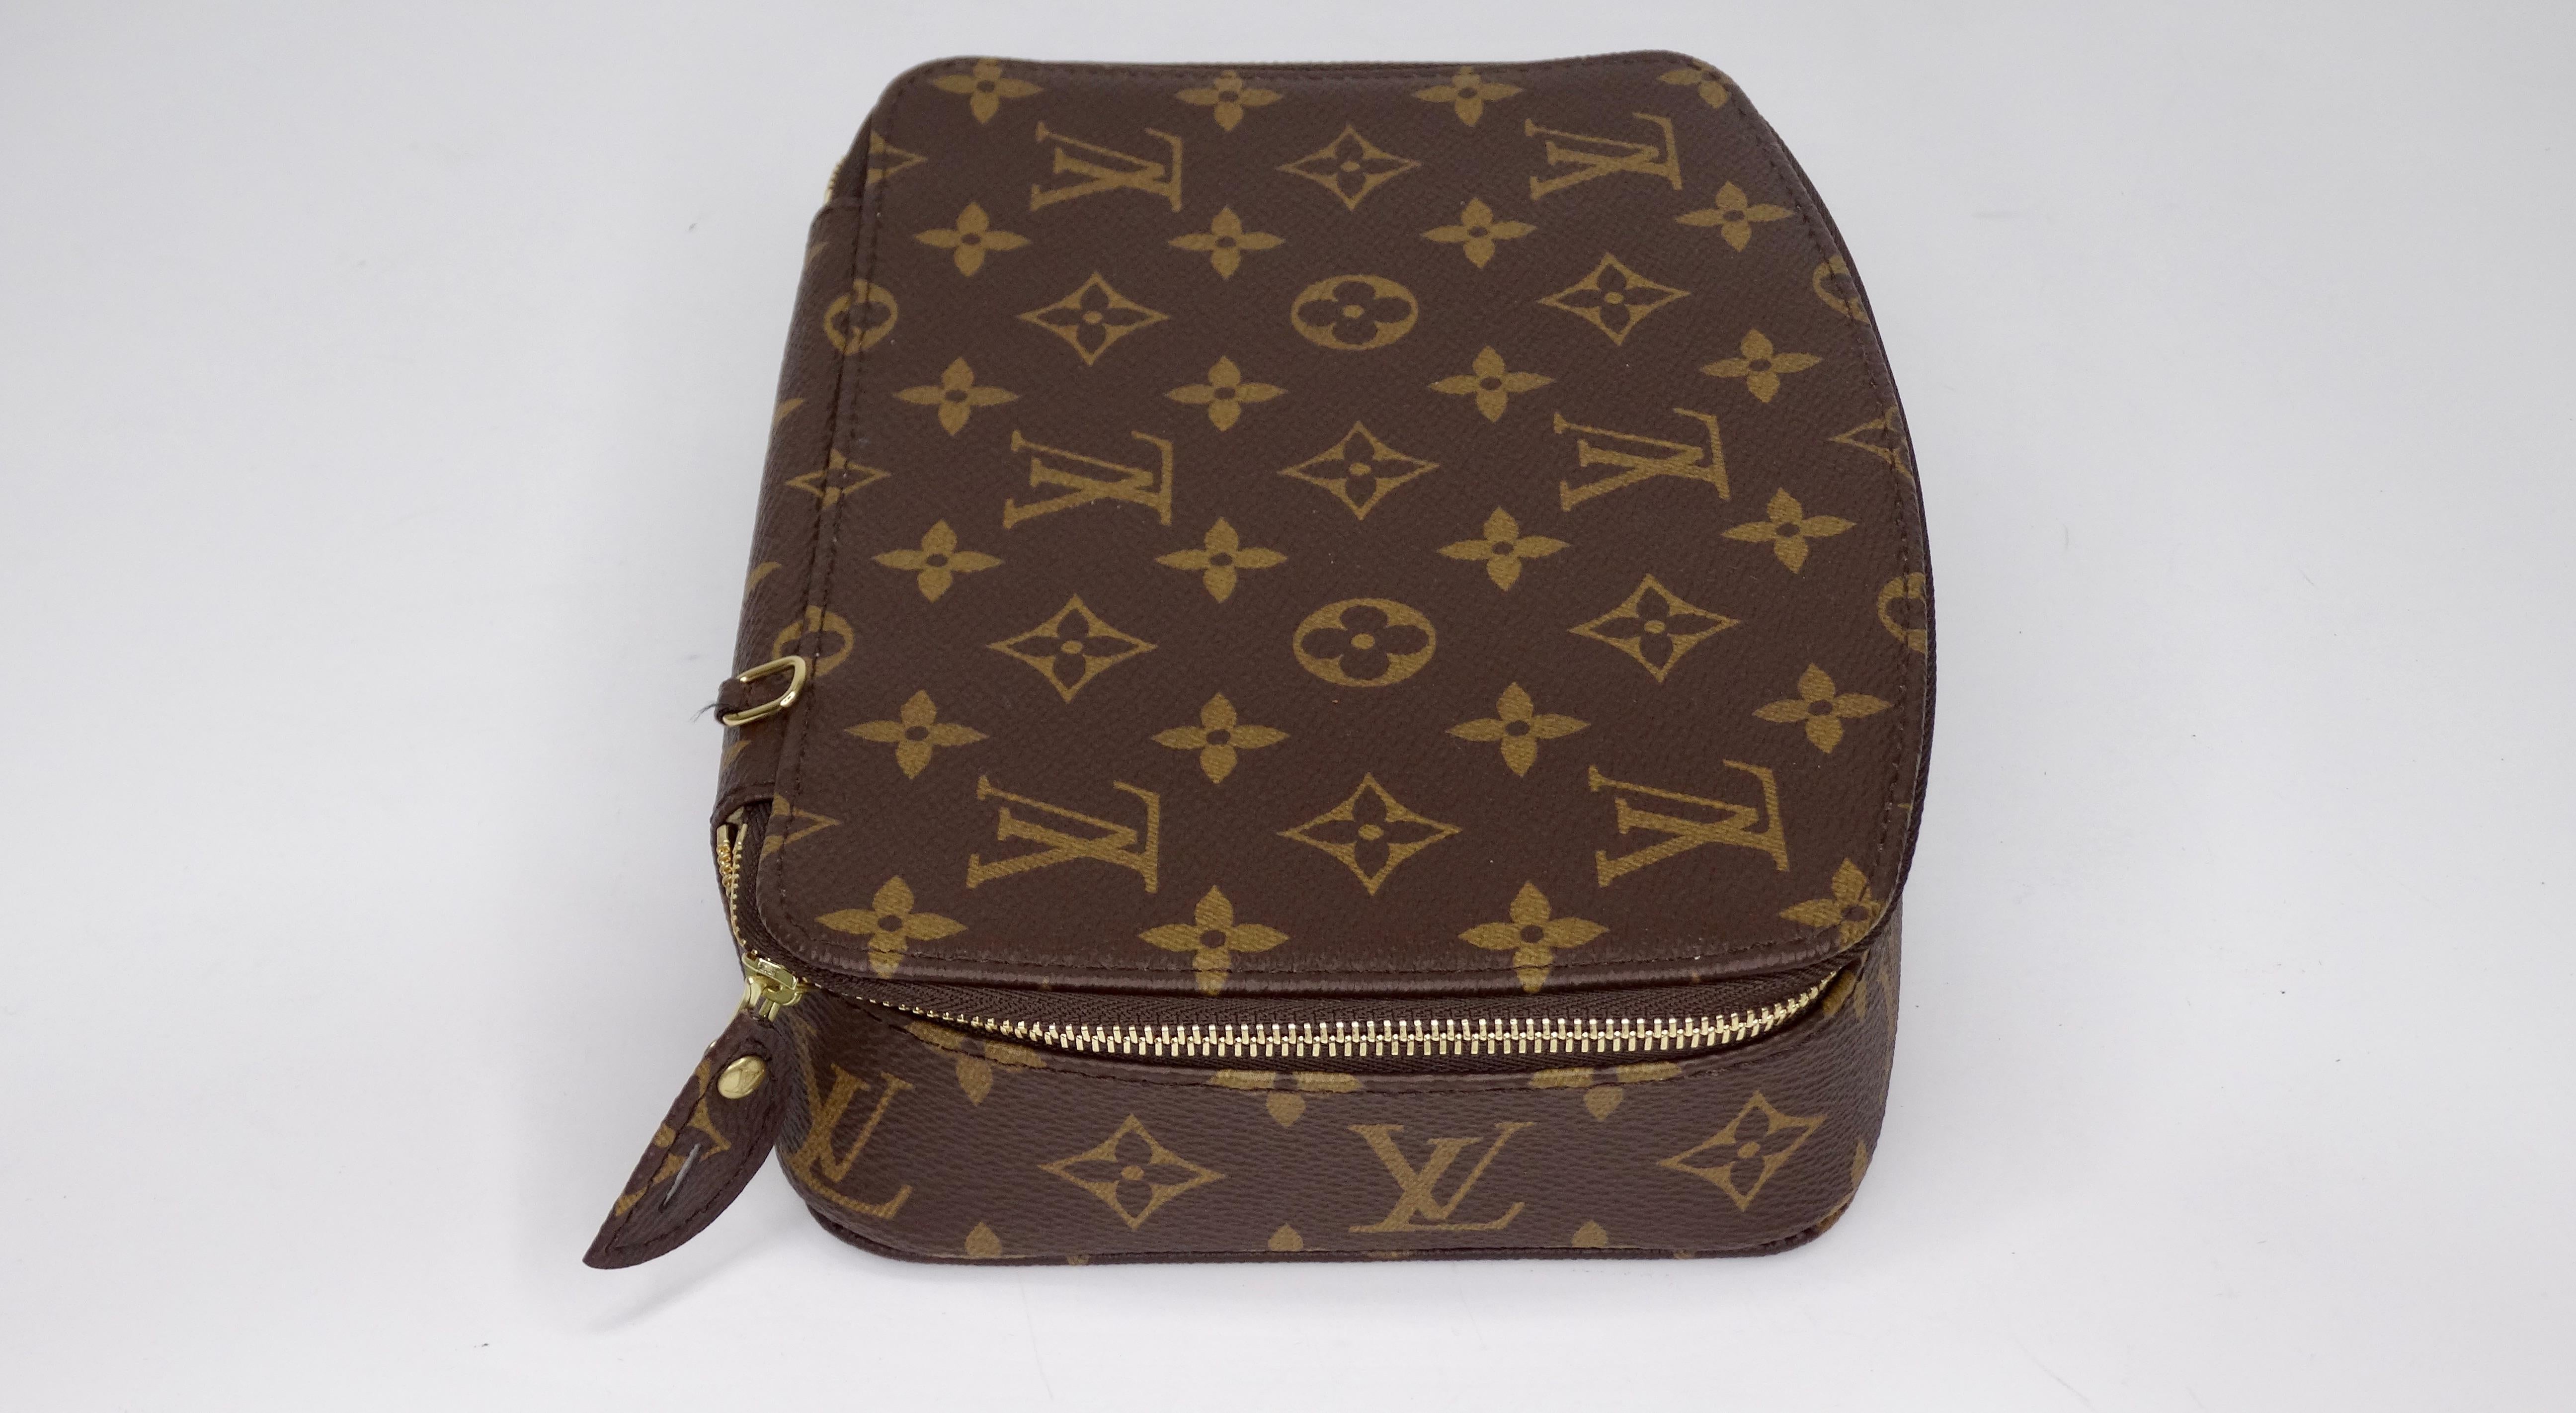 Get ready to travel! Circa 2017, this travel jewelry box features the signature LV monogram on the exterior. The LV zipper closure opens up to a suede interior with various jewelry holders and an attached three zip compartment pouch. Stamped Louis